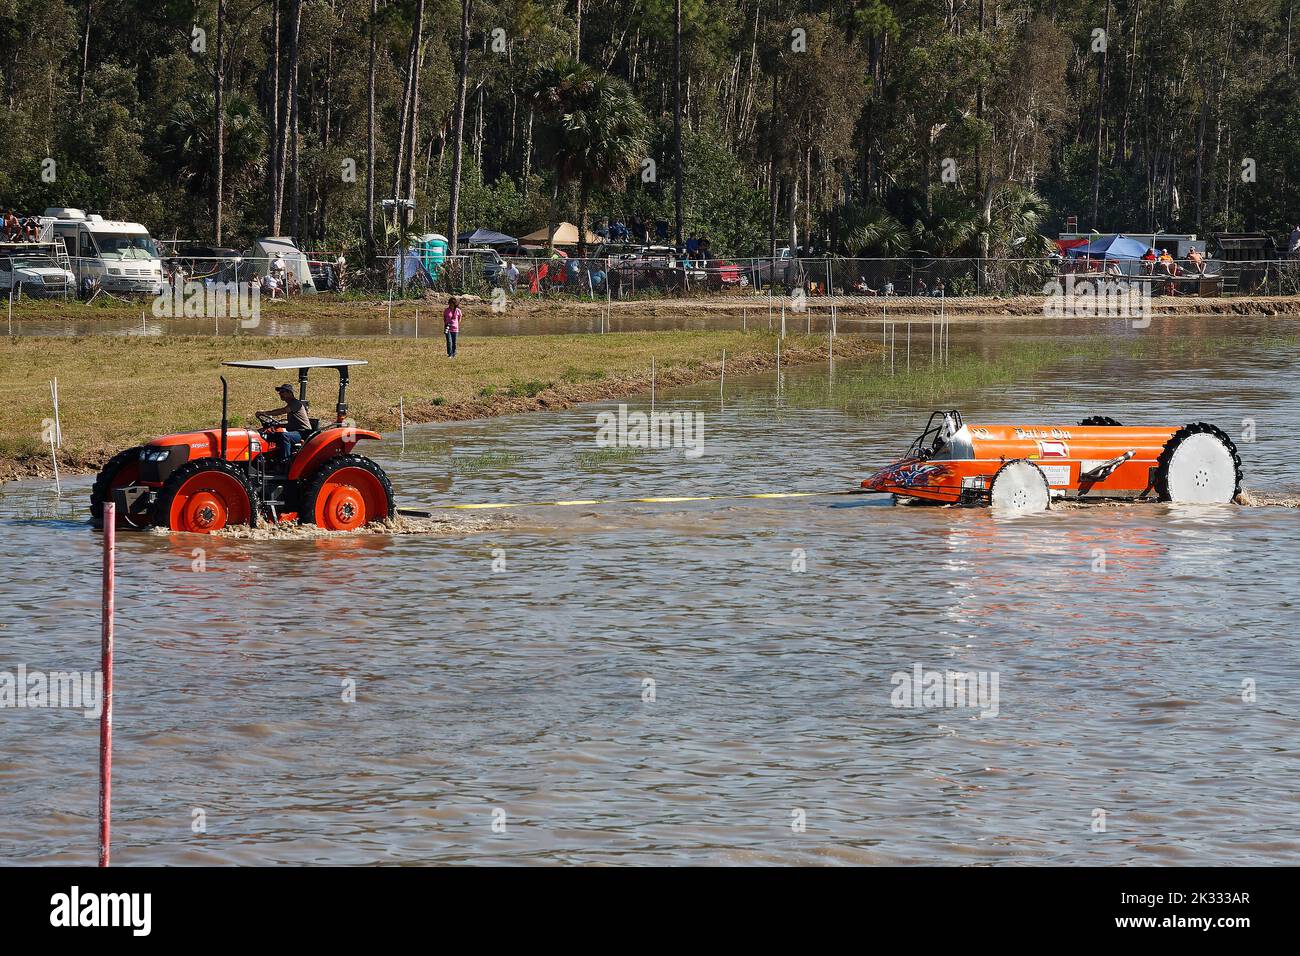 swamp buggy being towed, broken down during race, help, assistance, moving through water, jeep style, vehicle sport, Florida Sports Park, Naples, FL Stock Photo